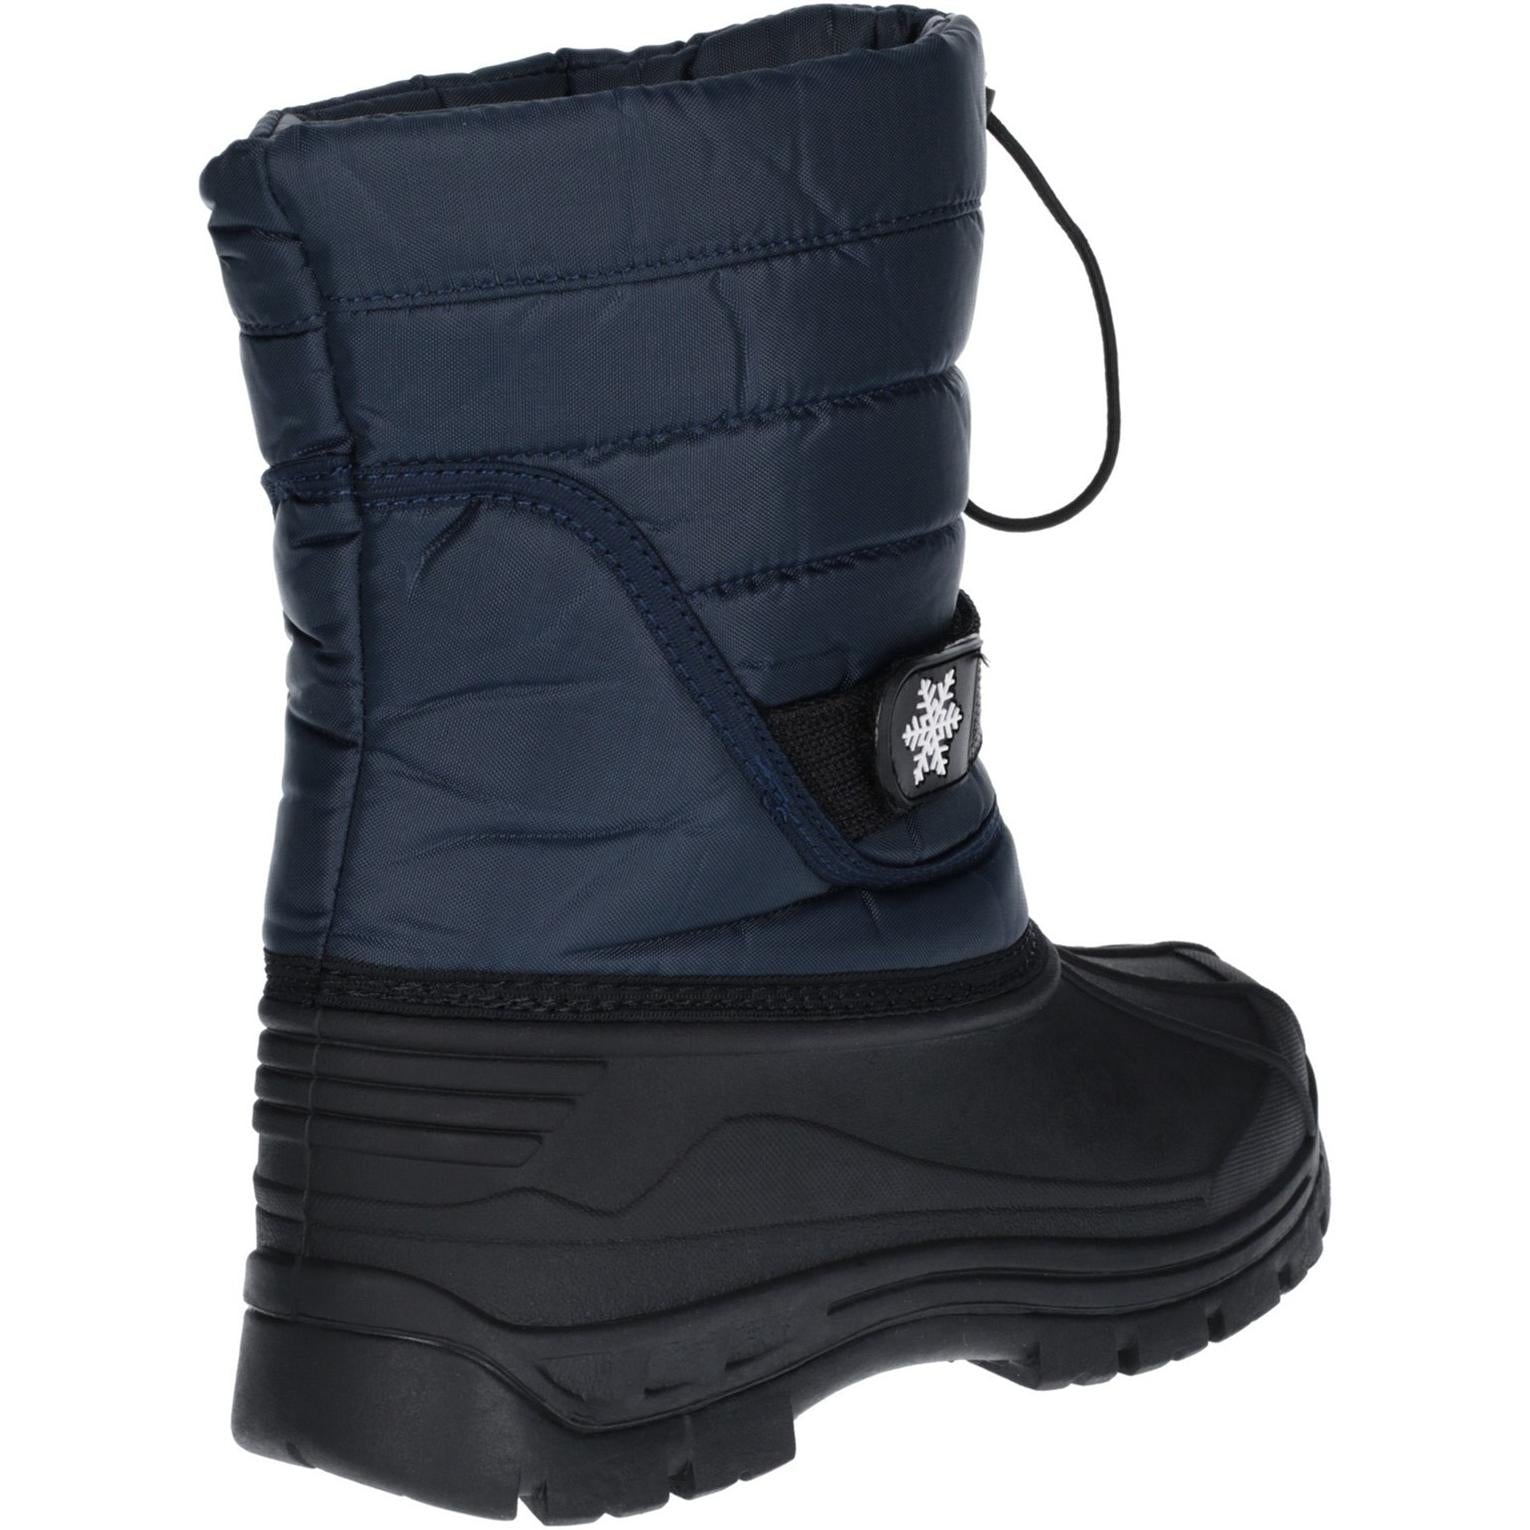 Cotswold Icicle Toggle Lace Snow Boot